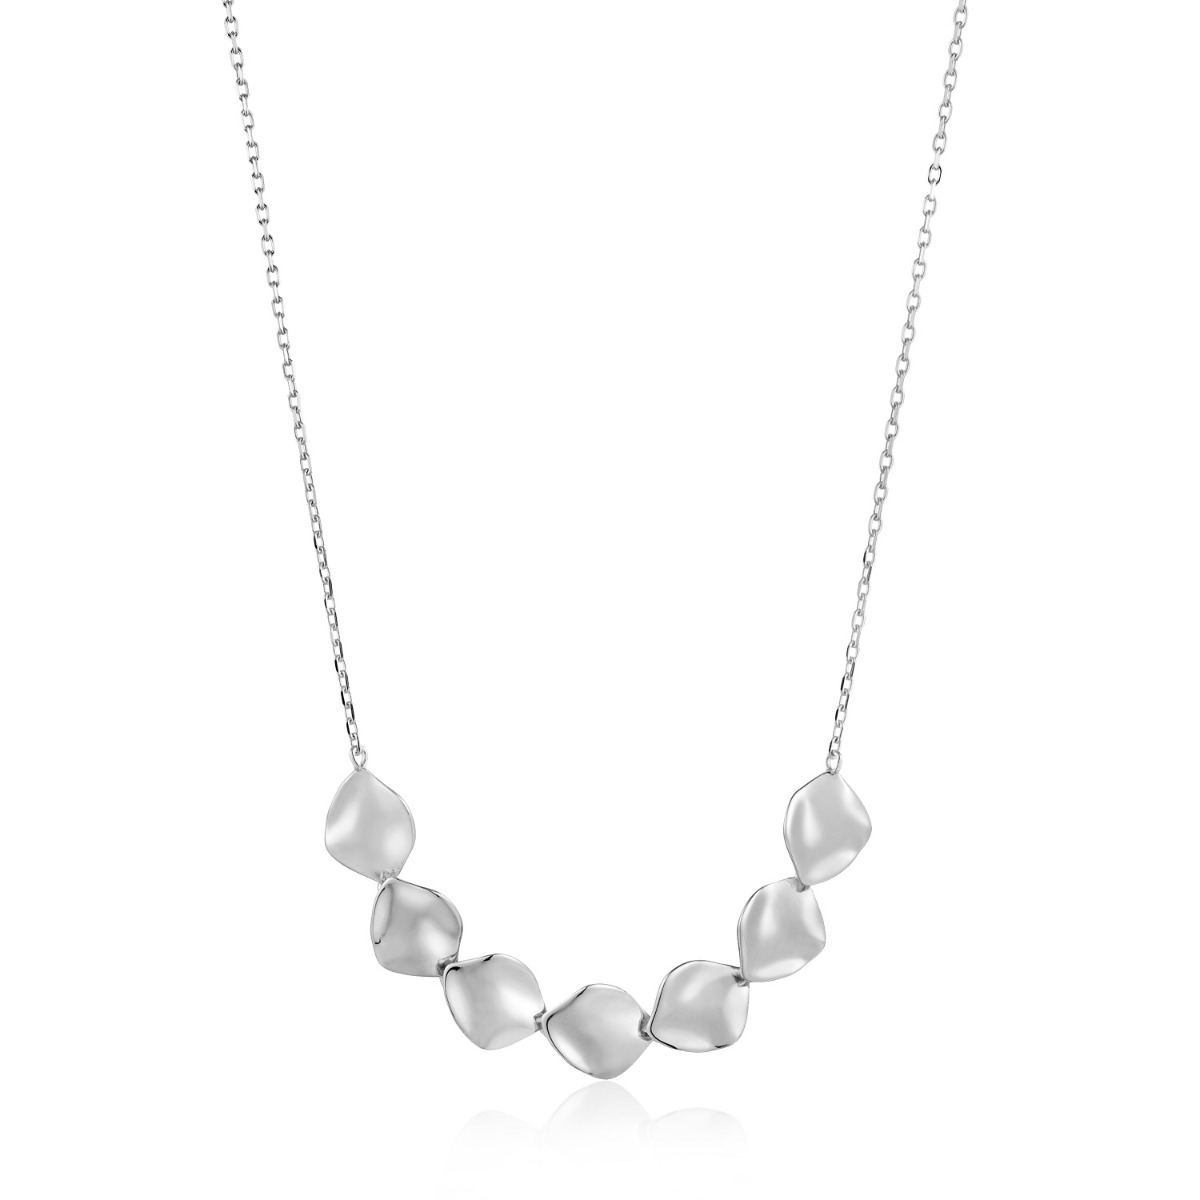 Ania Haie Crush Multiple Discs Necklace, Silver N017-04H 